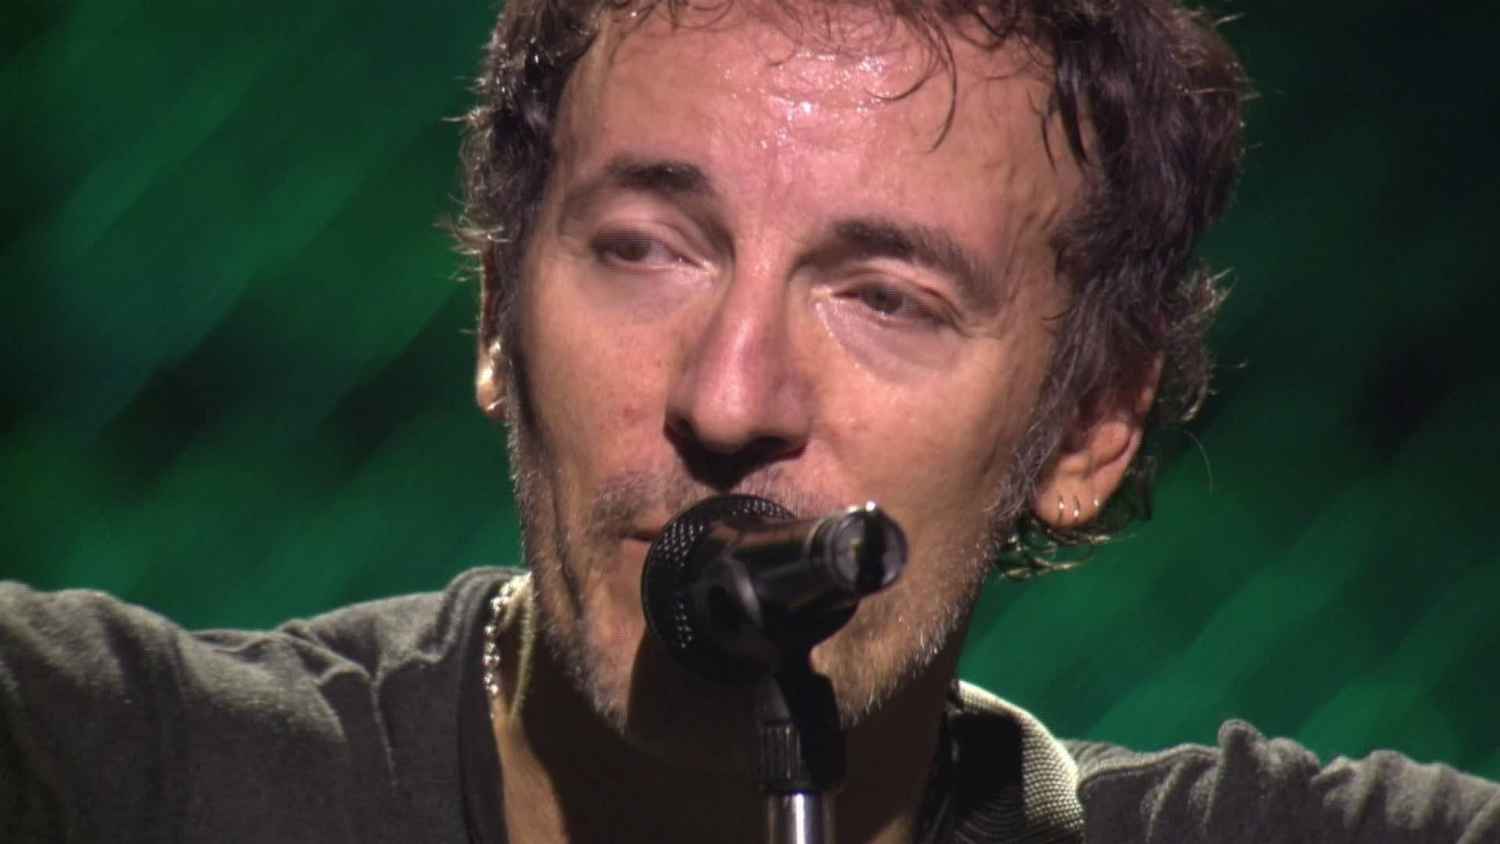 Bruce Springsteen and The E Street Band - Live In Barcelona